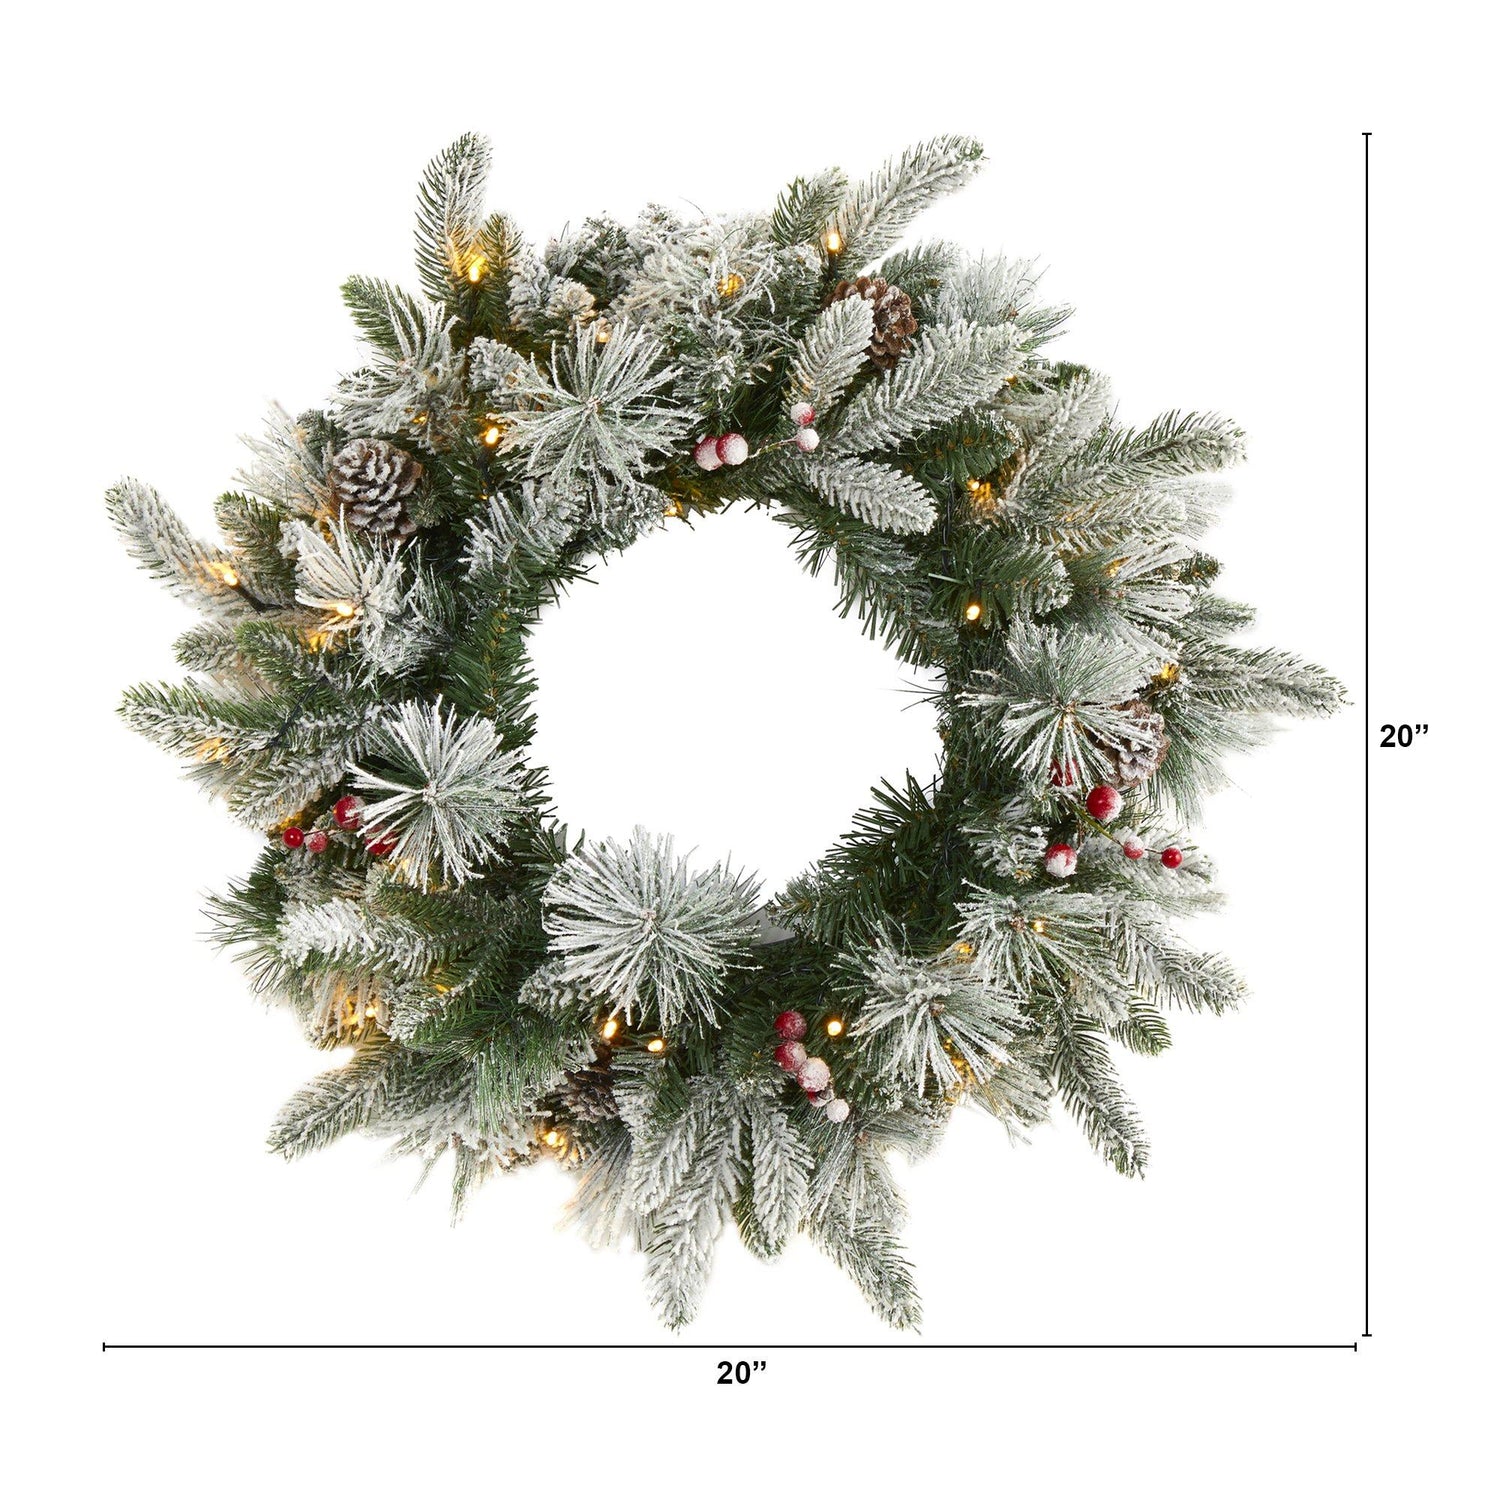 20” Flocked Mixed Pine Artificial Christmas Wreath with 50 LED Lights, Pine Cones and Berries